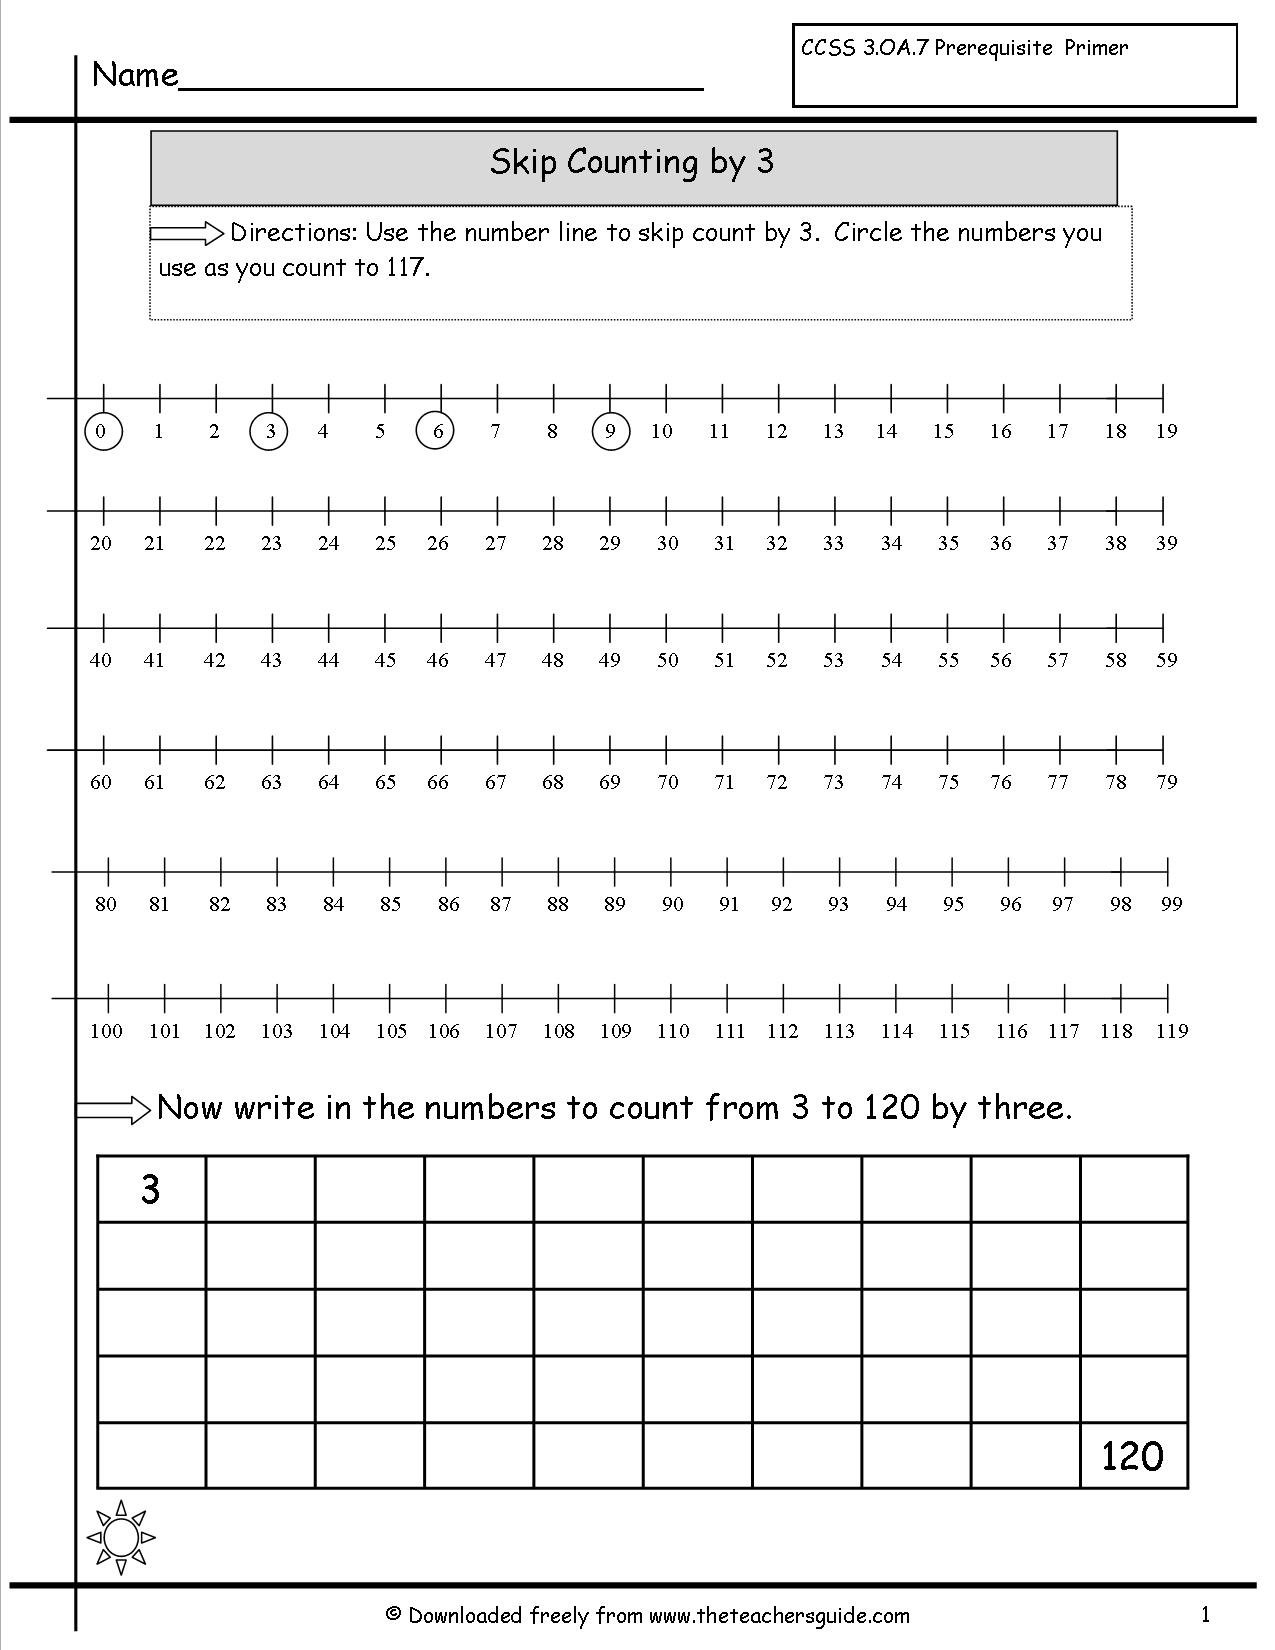 Counting Coins Bingo From The Teacher's Guide Along With Skip Counting By 3 Worksheet